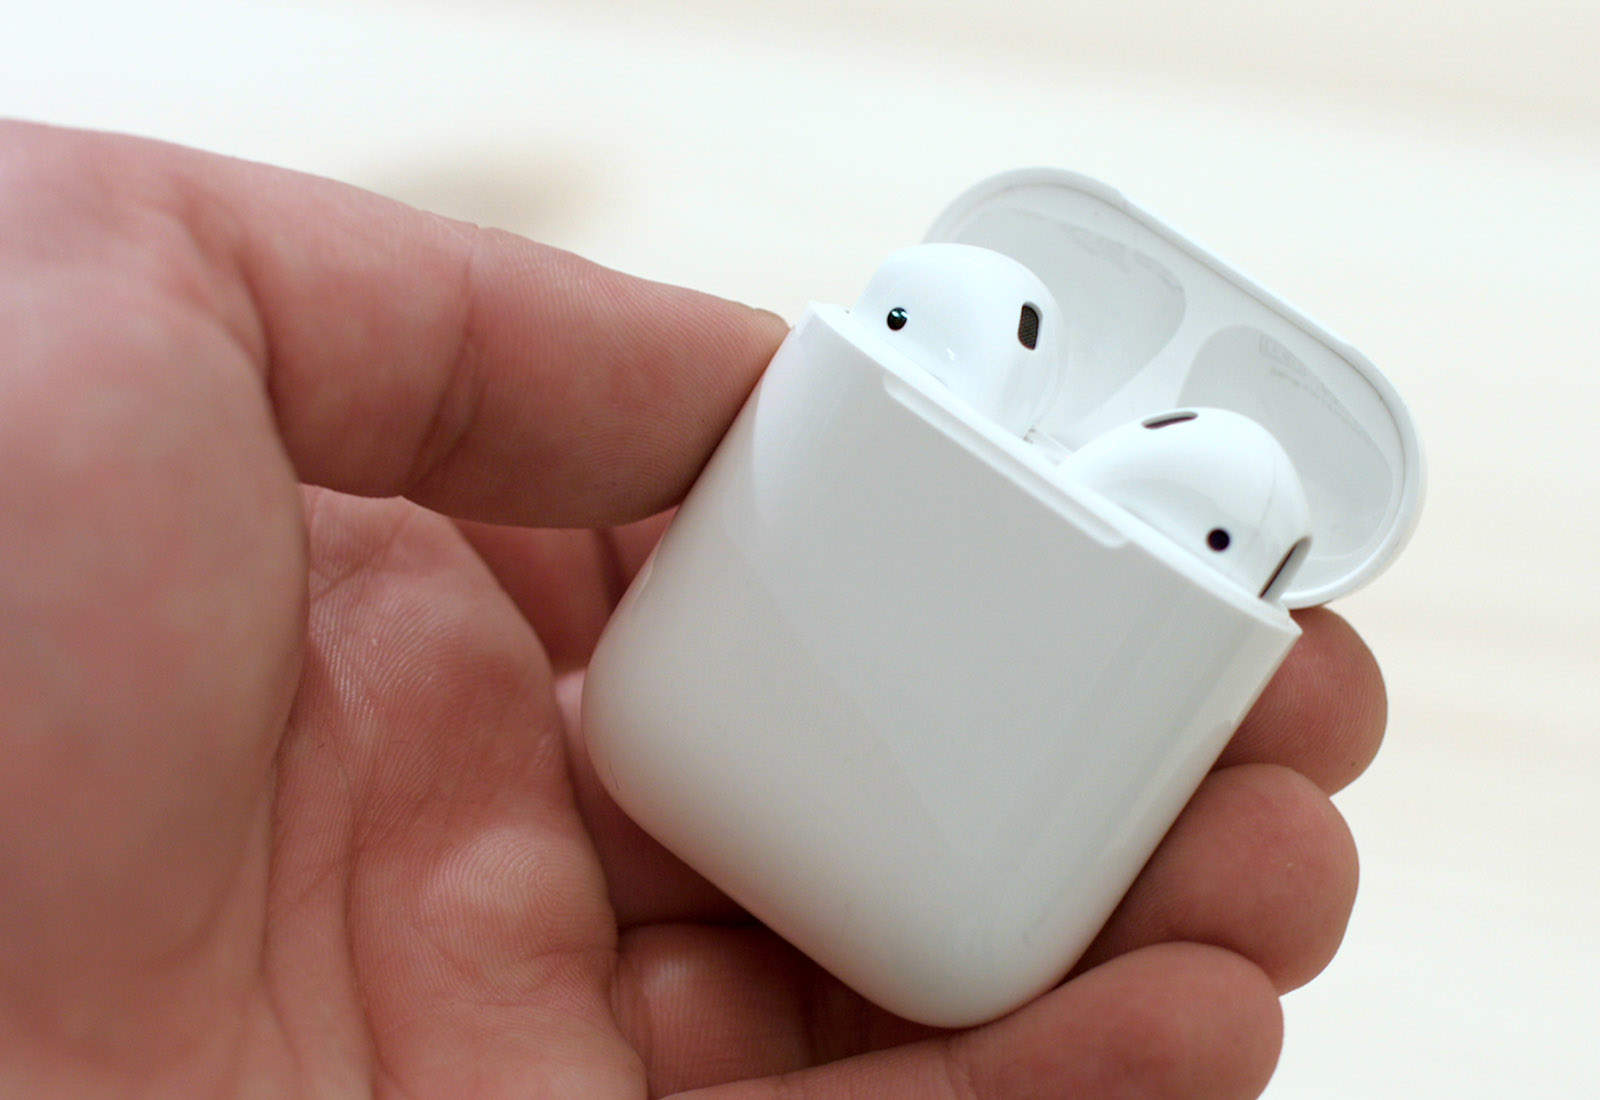 A hand holding a pair of AirPods